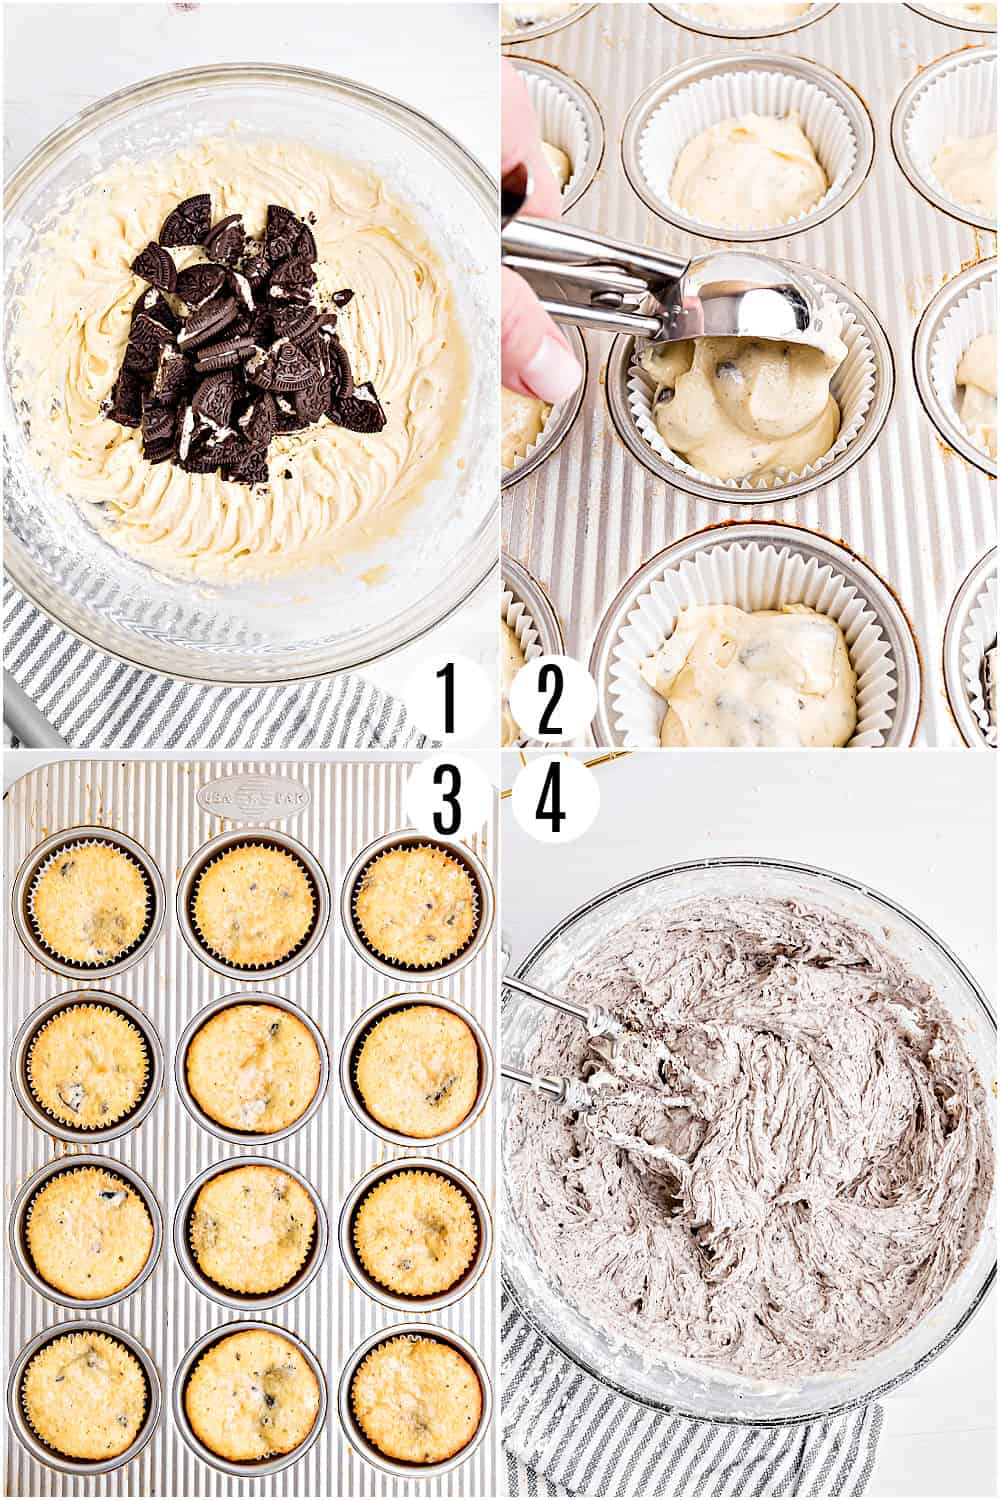 Step by step photos showing how to make oreo cupcakes.